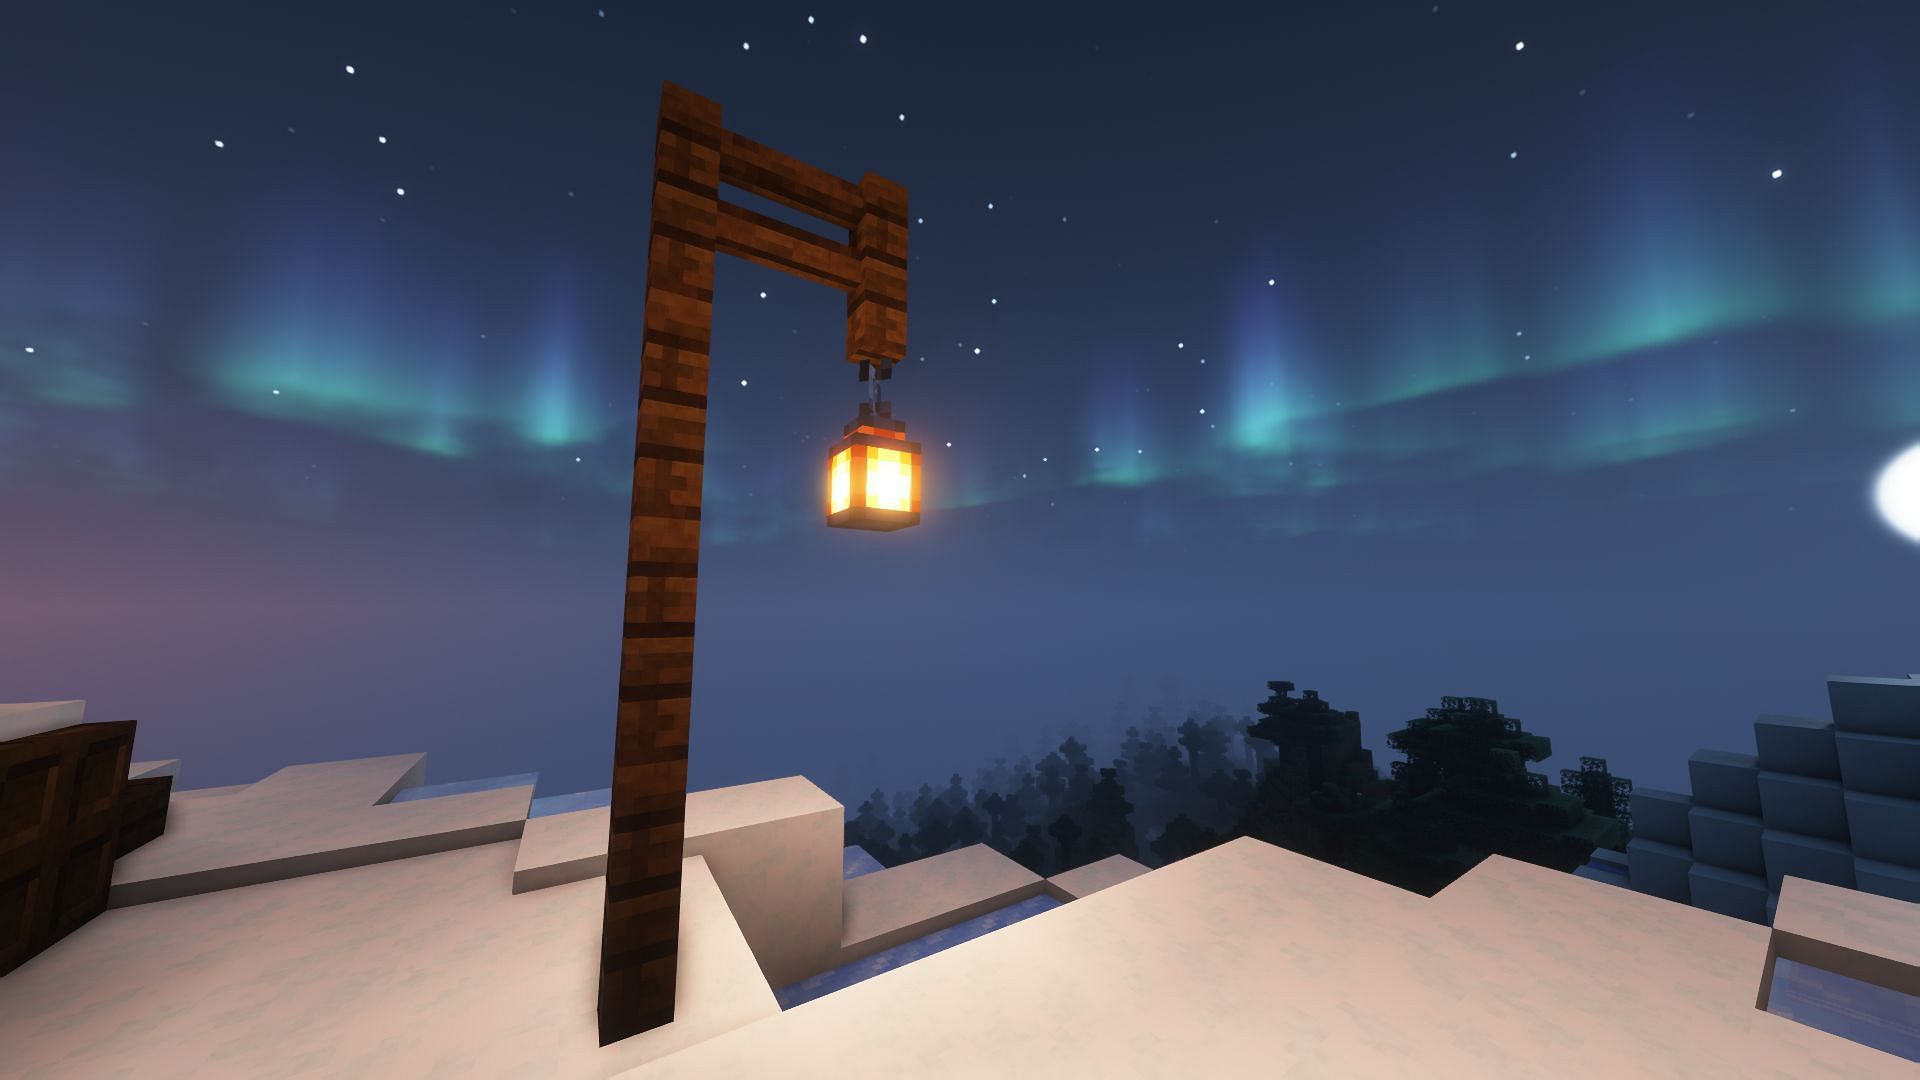 The most traditional-looking lamp post in Minecraft (Image via Mojang)